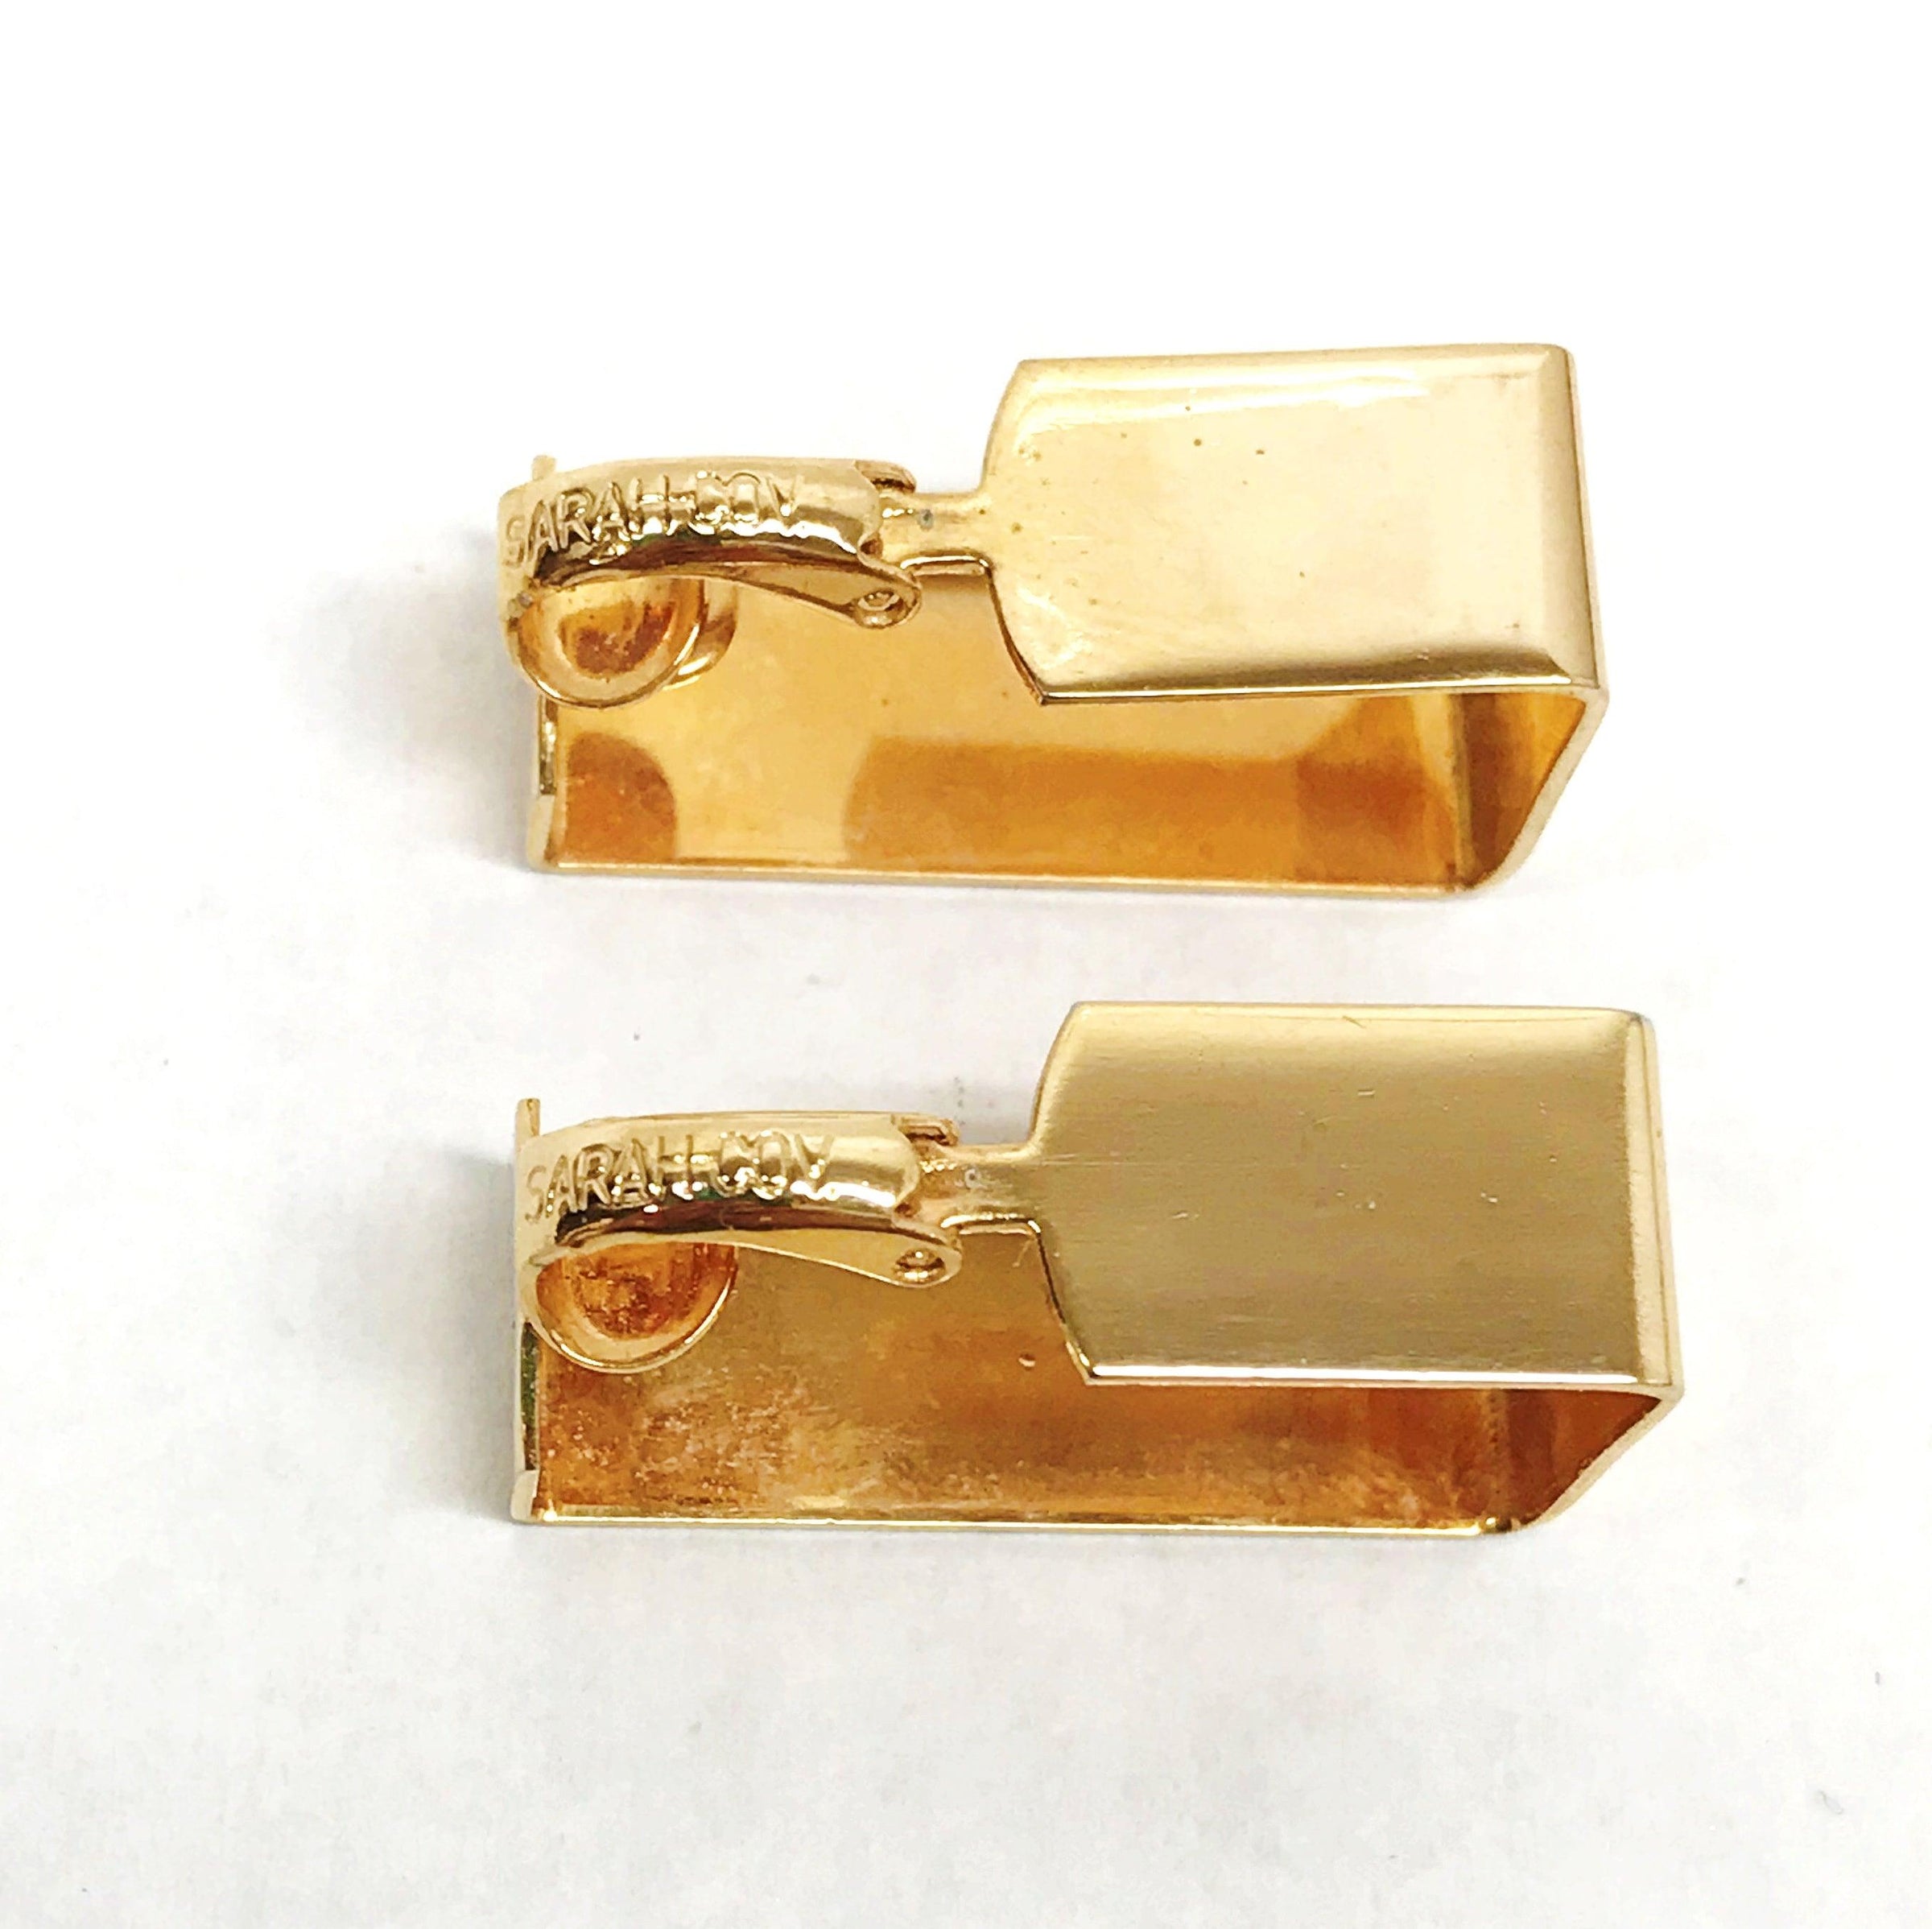 1978 Sarah Coventry Times Square Gold Toned Clip-On Earrings - Hers and His Treasures